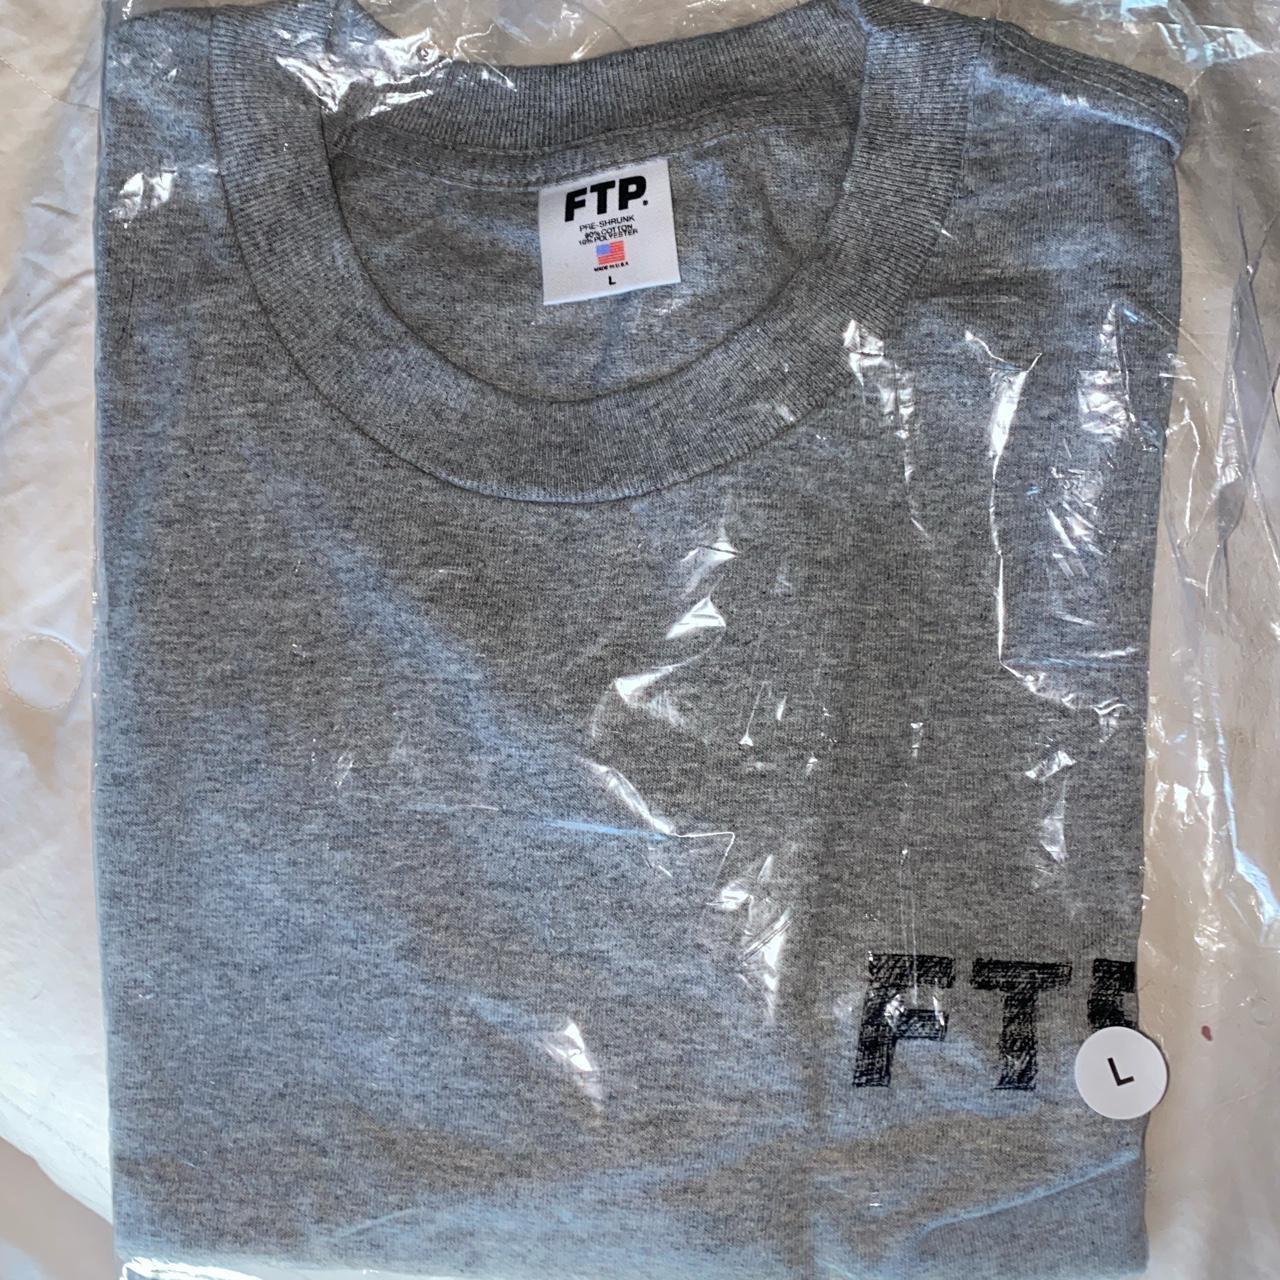 Product Image 1 - #FTP #FUCKTHEPOPULATION

SCRIBBLE LOGO TEE. Size